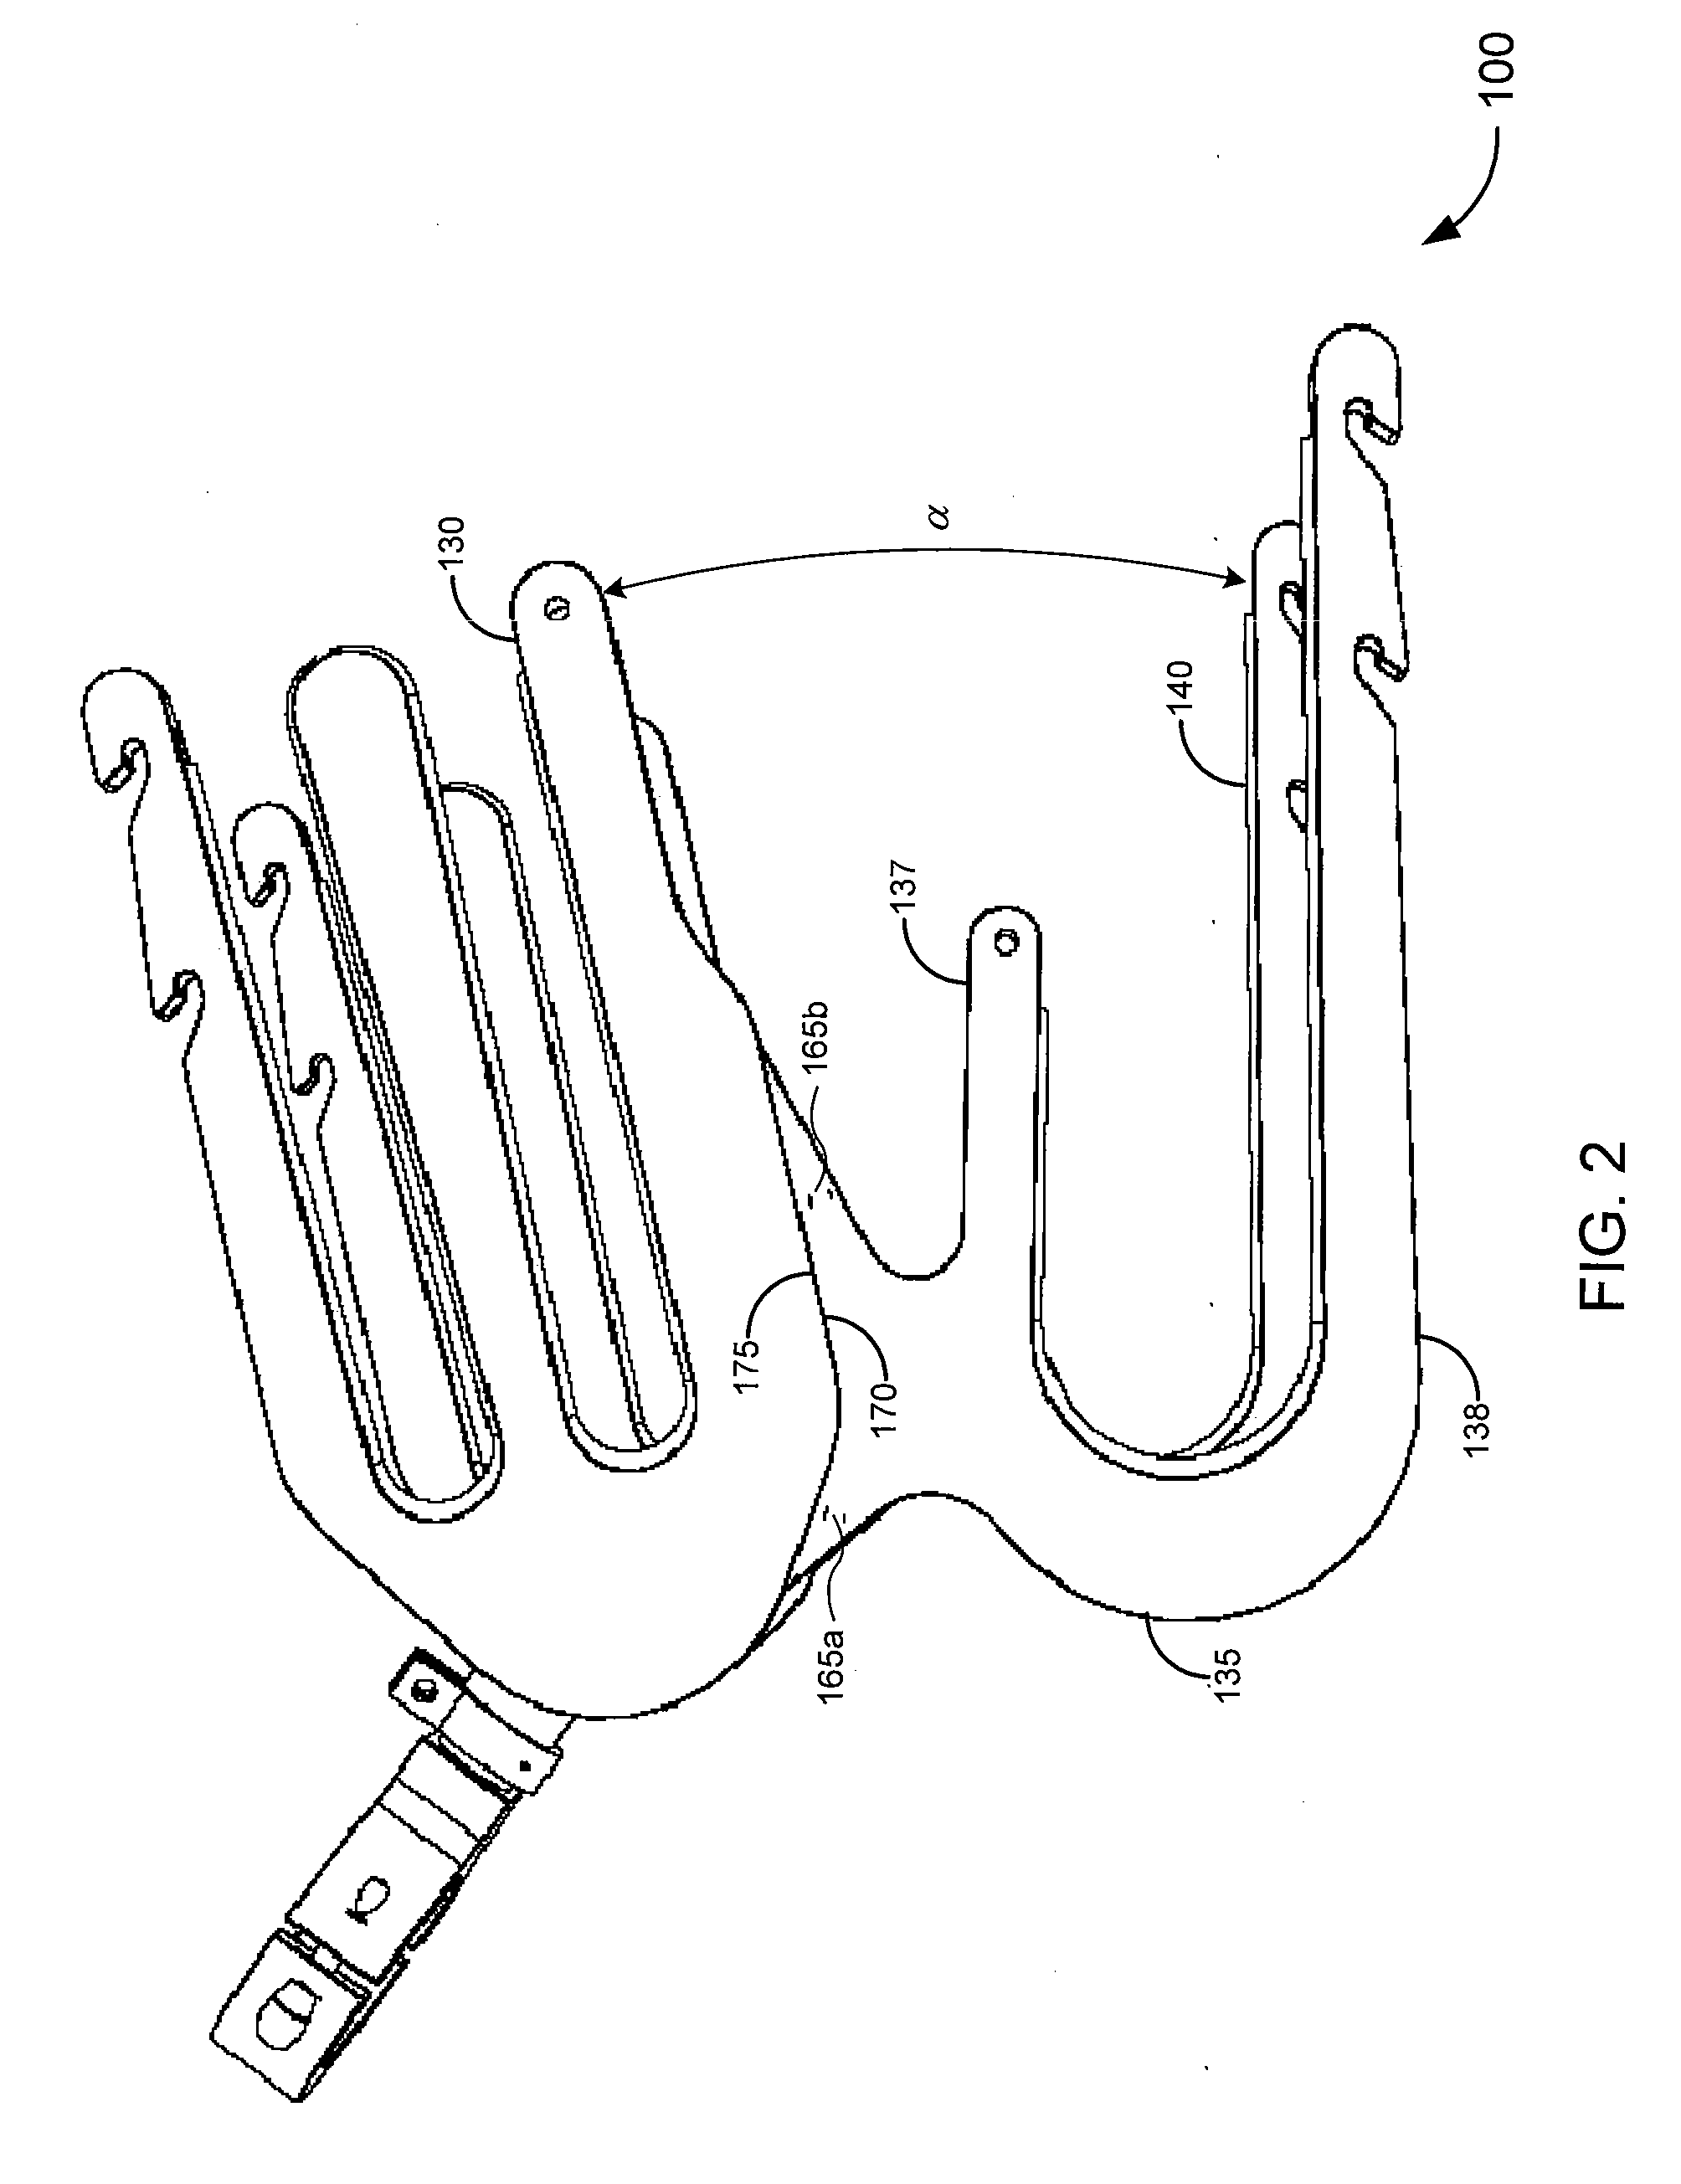 Water sports equipment rack and methods